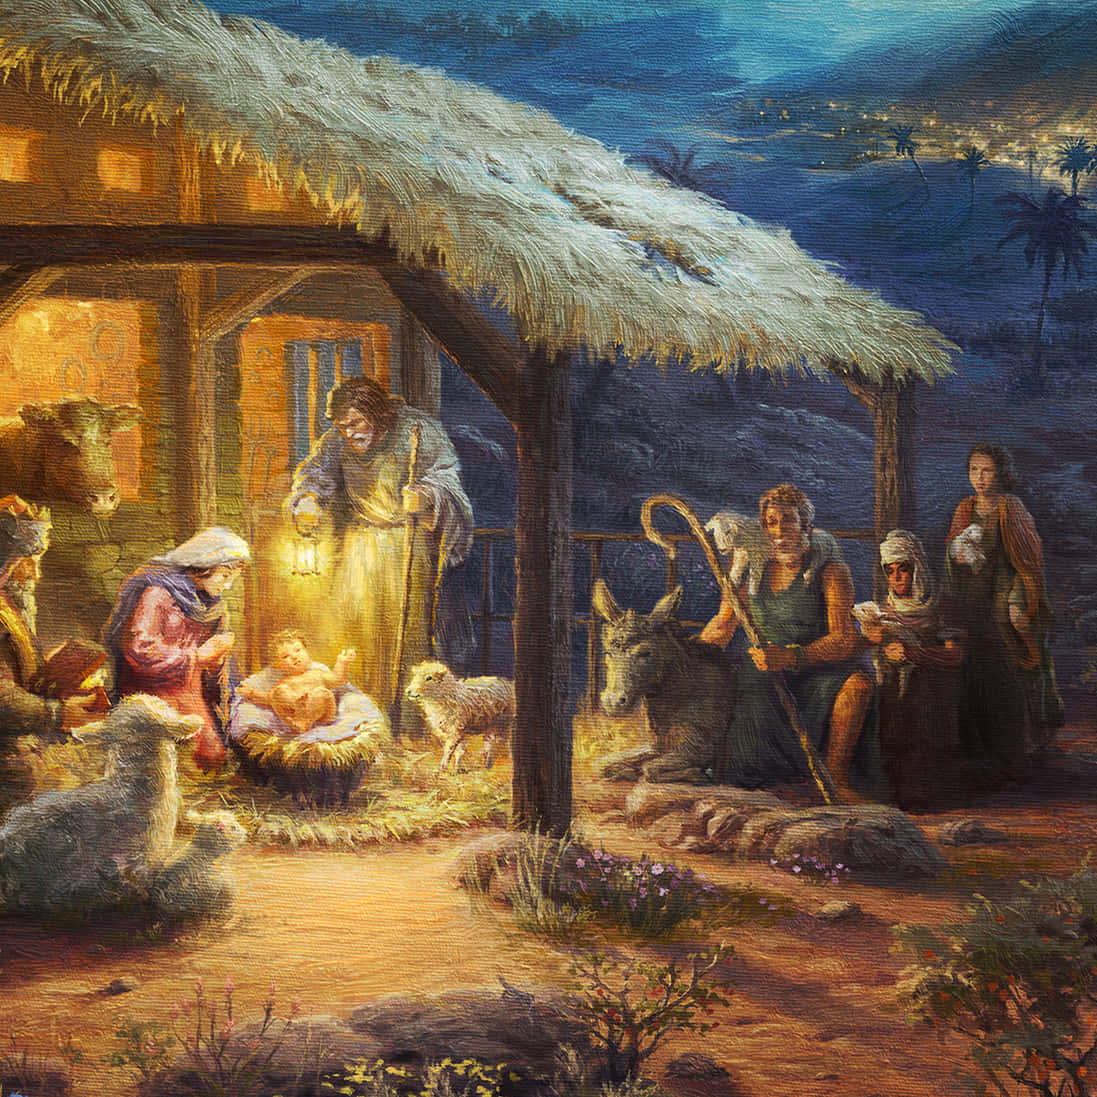 The timeless scene of the Nativity